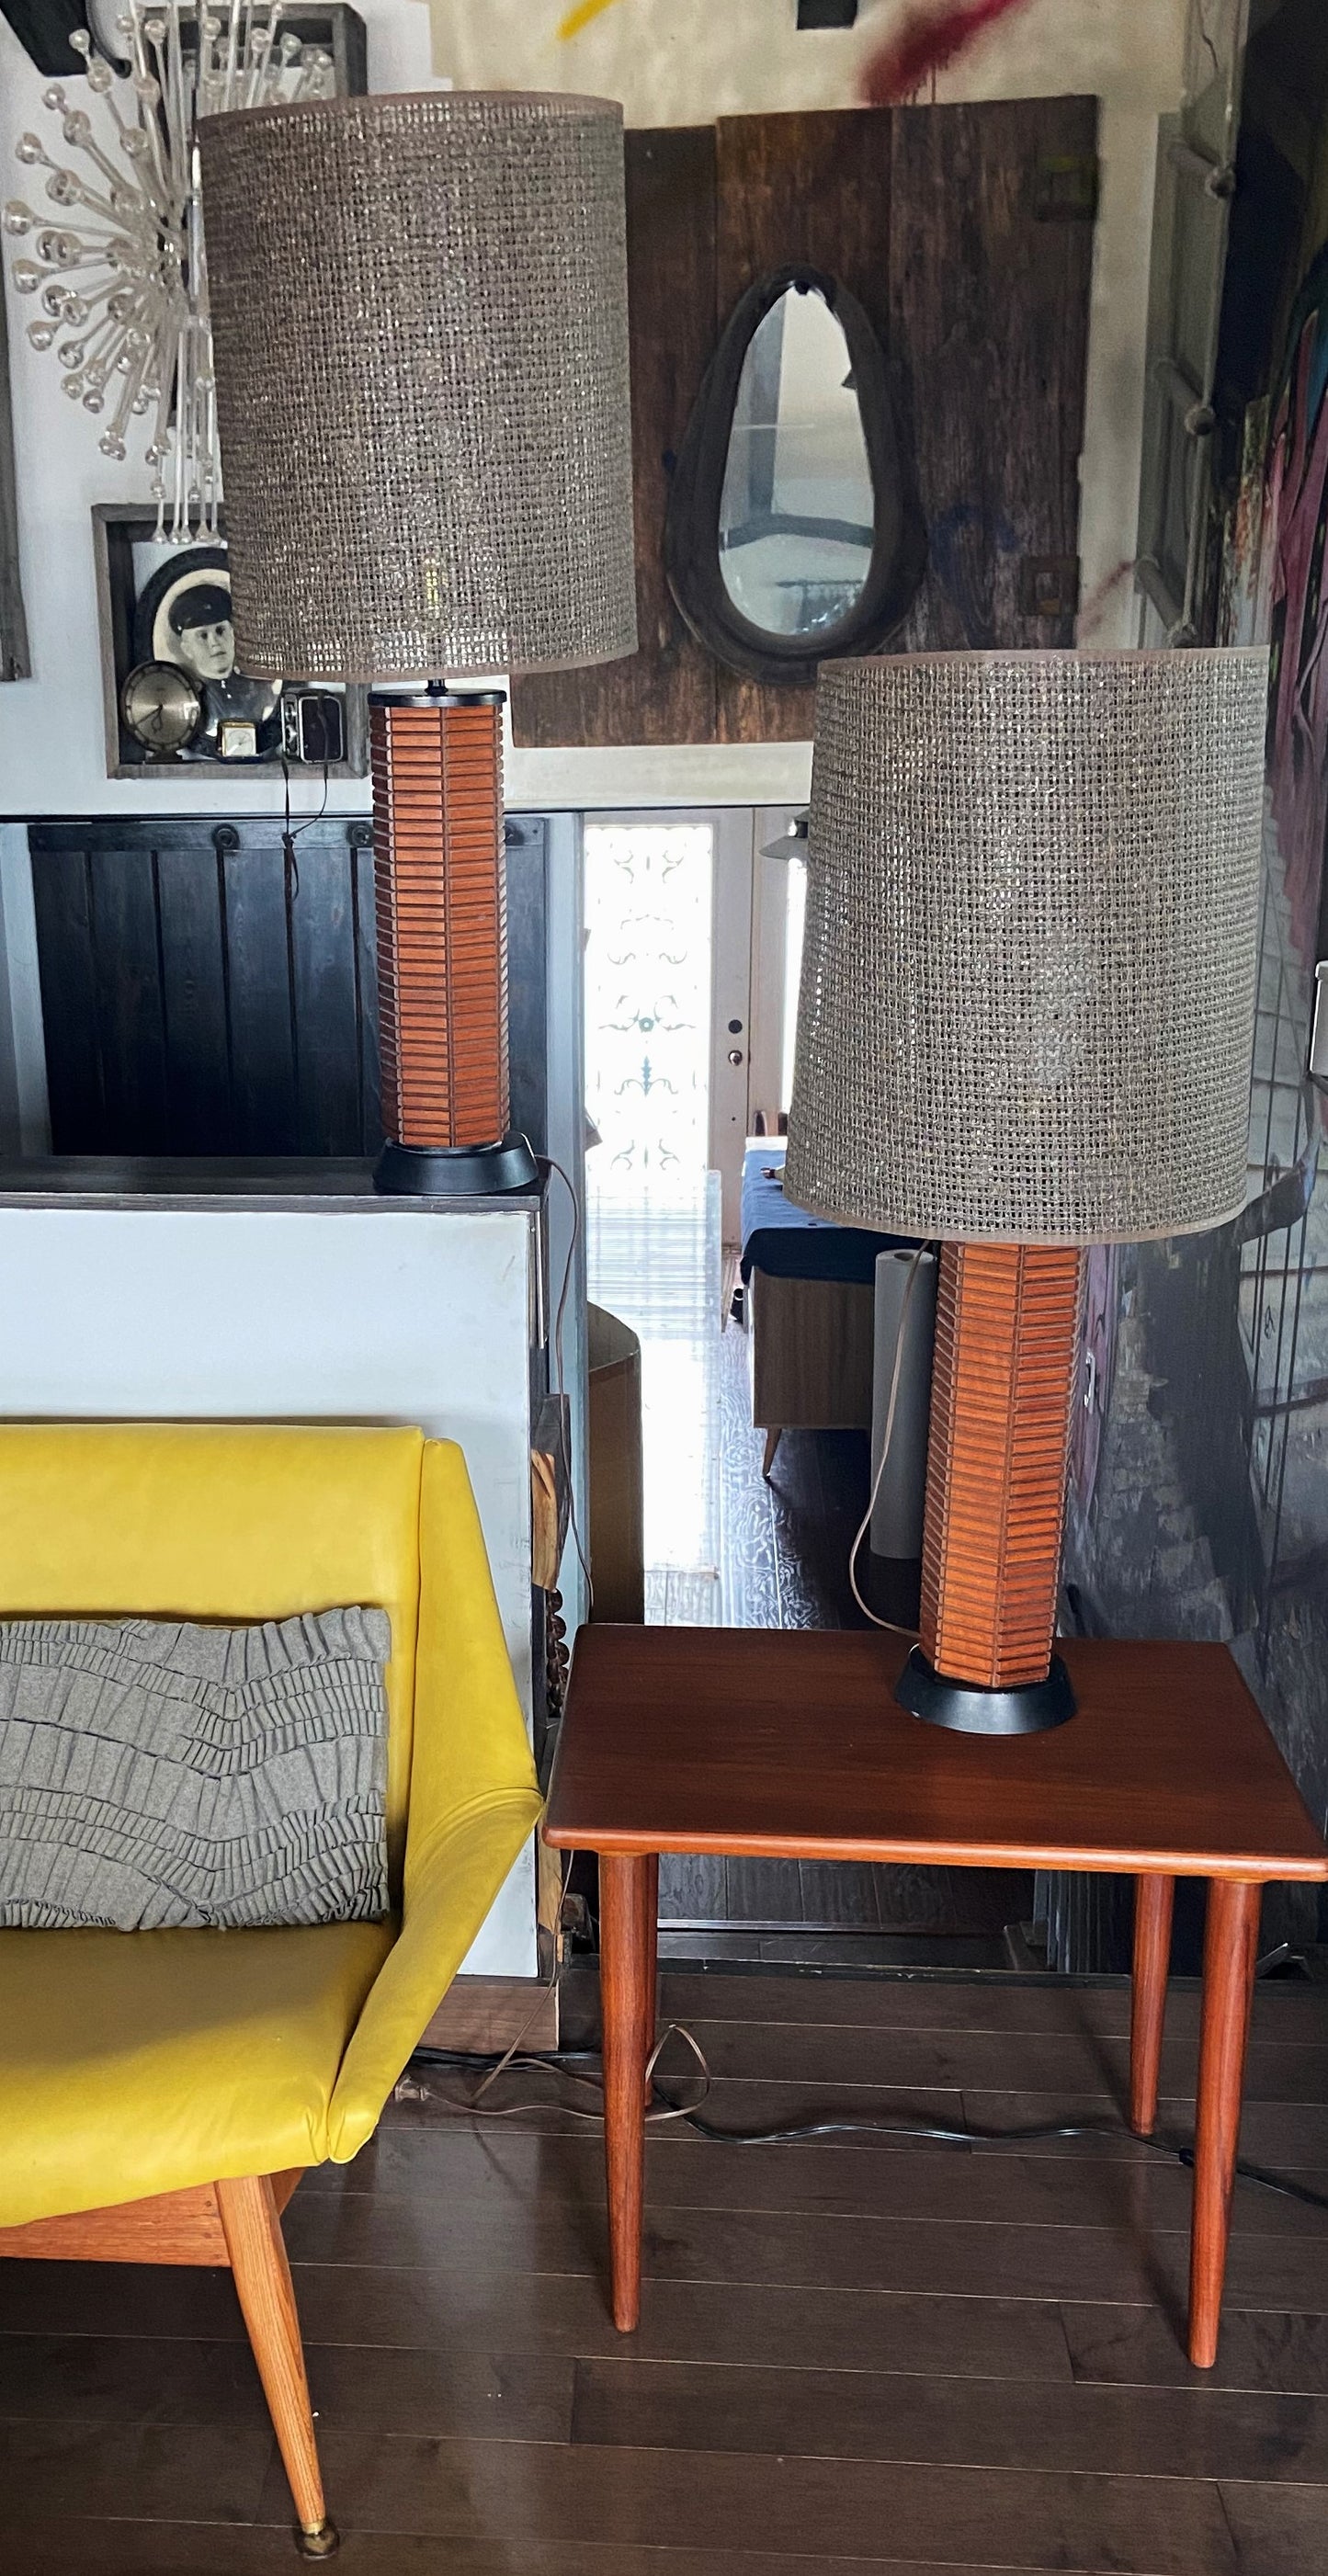 A pair of Mid Century Modern "Gruvwood" Table Lamps with Original Shades